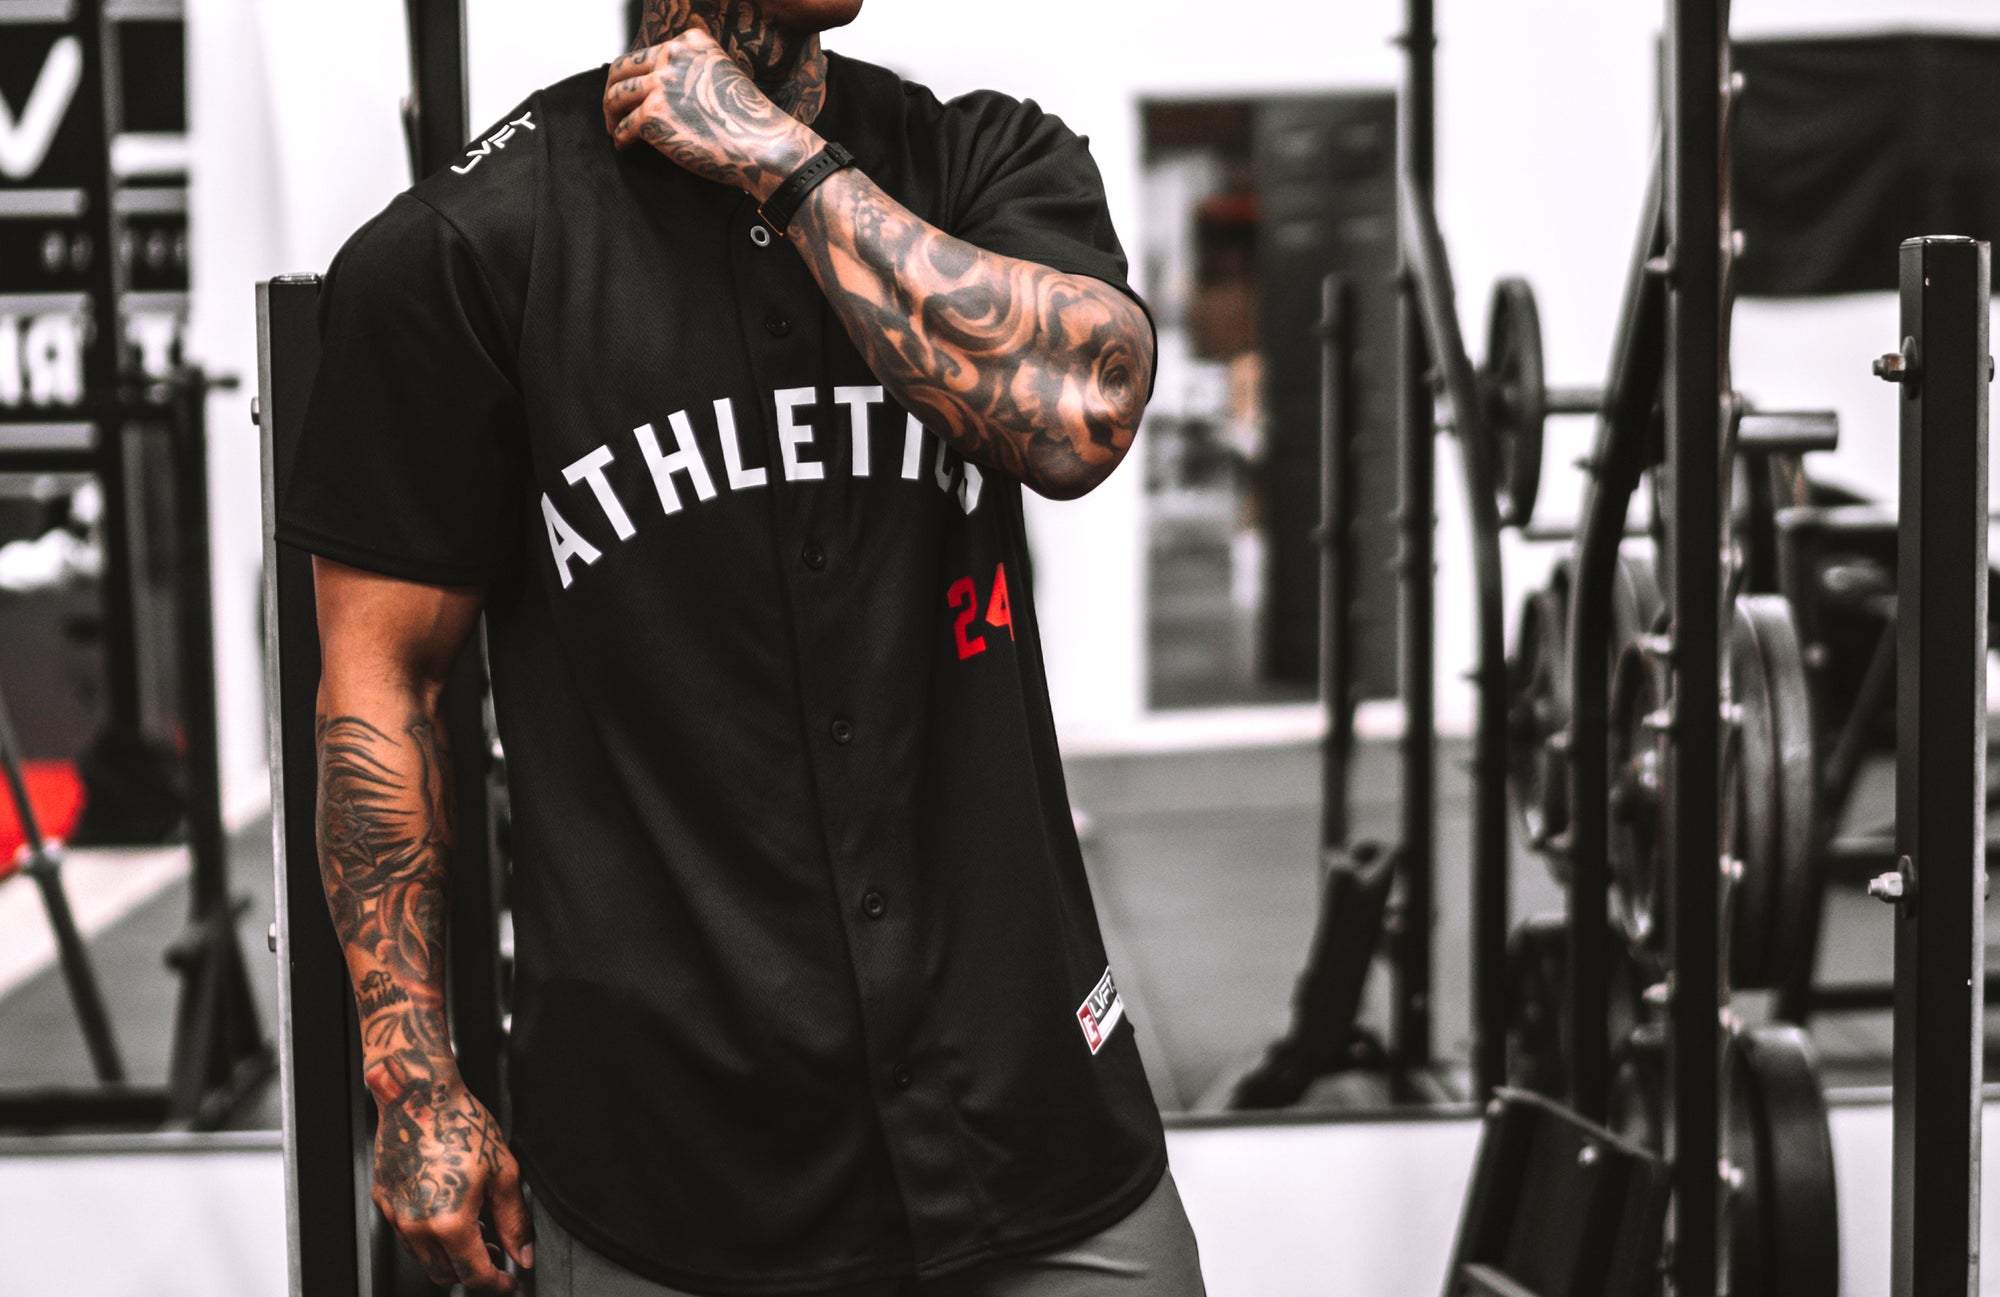 how should a baseball jersey fit